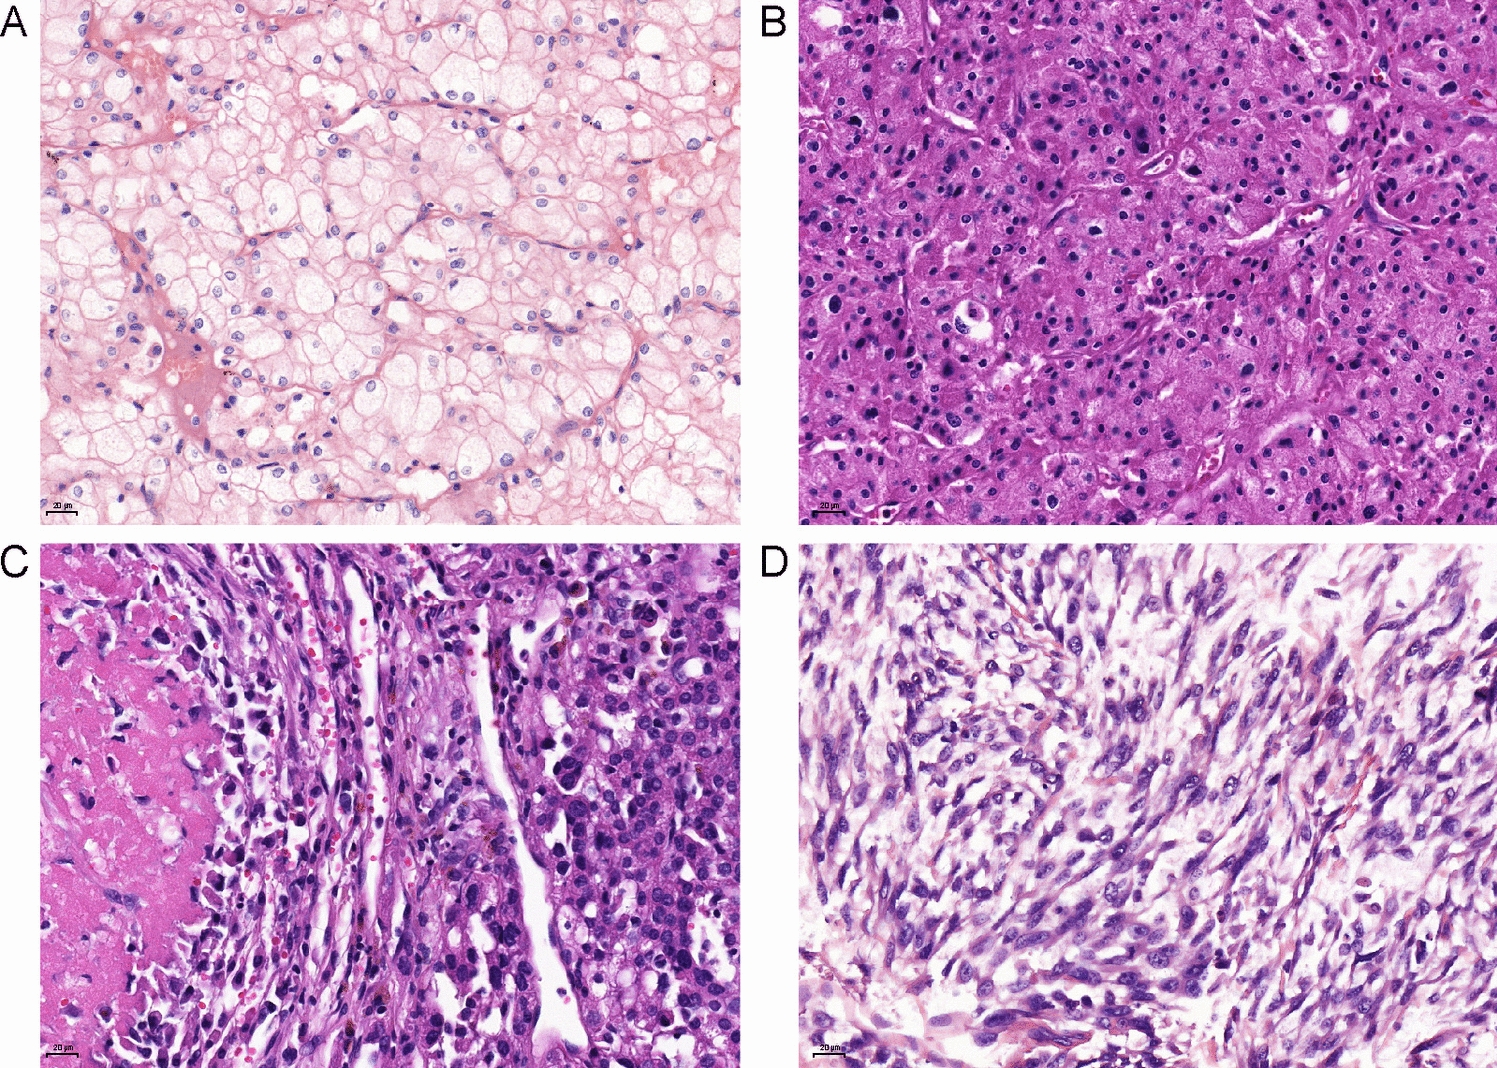 External validation of a four-tiered grading system for chromophobe renal cell carcinoma